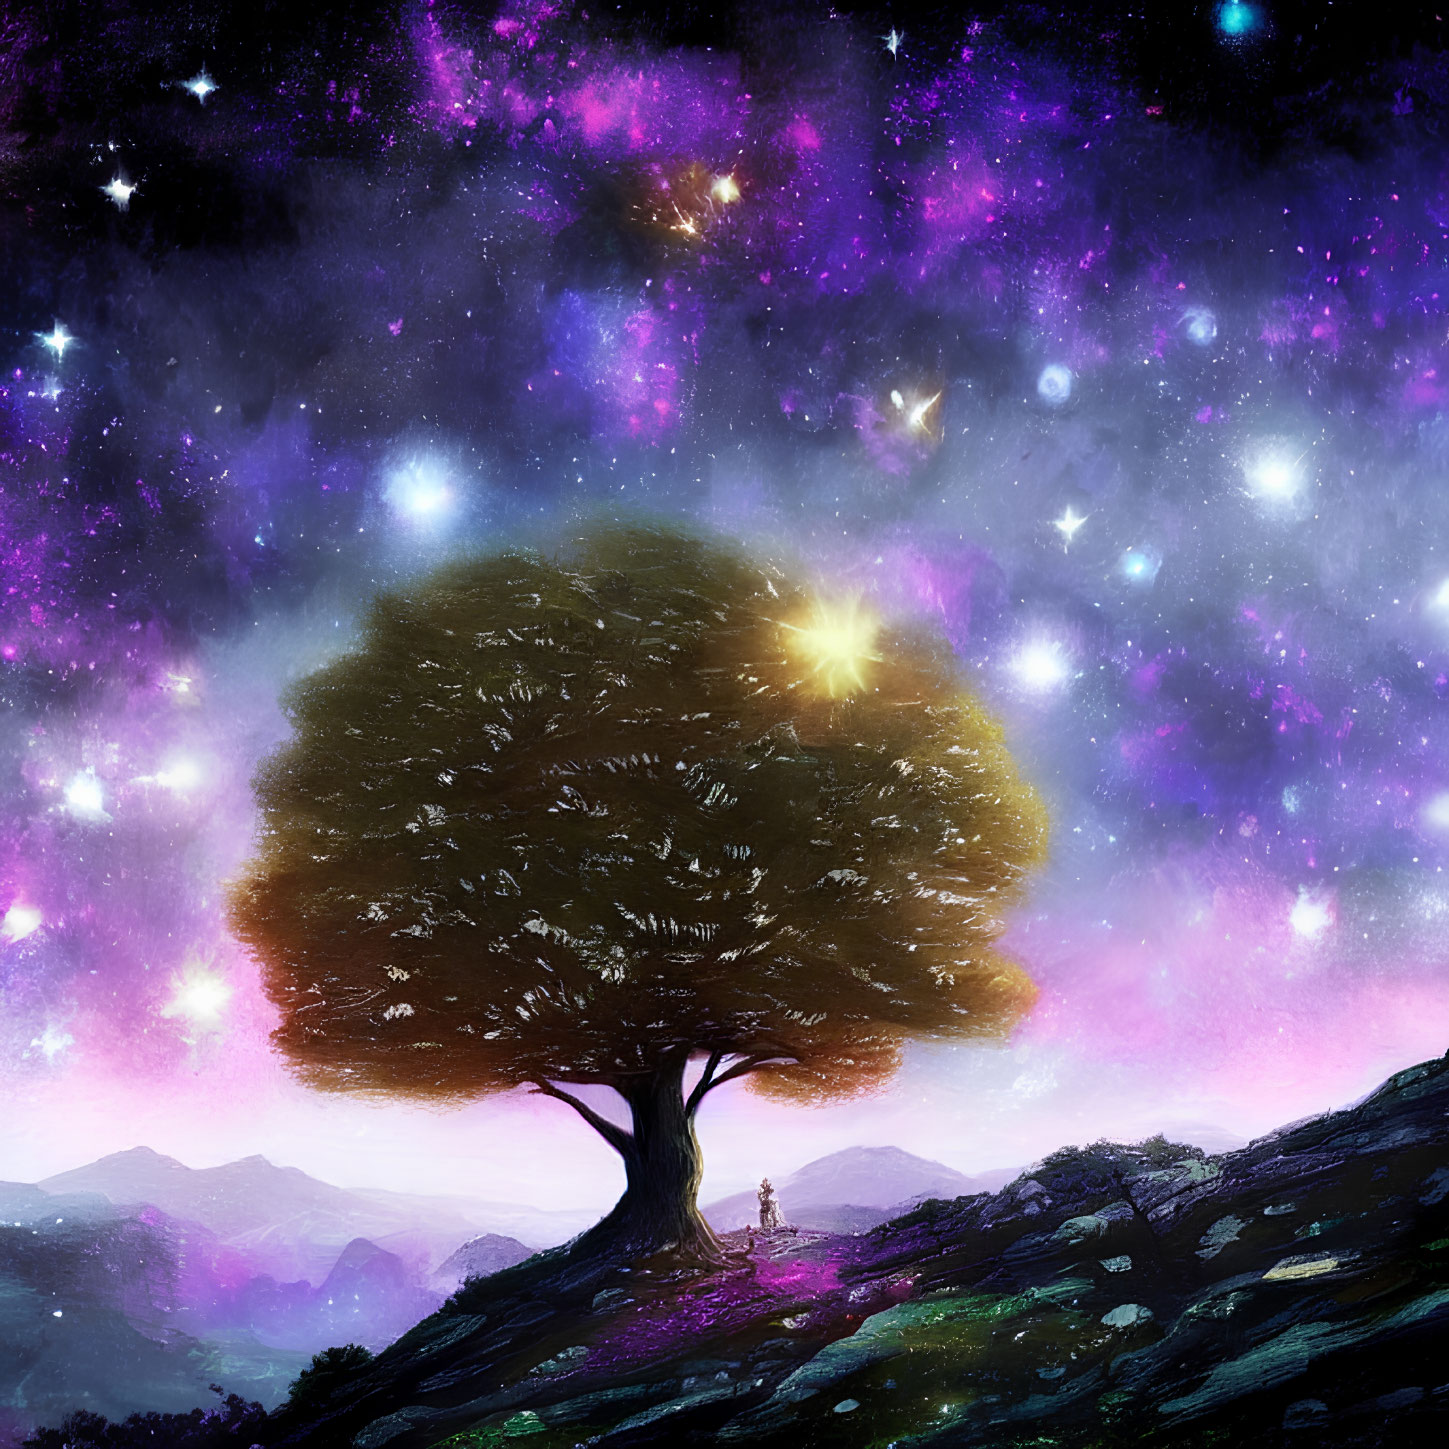 Solitary tree on hilltop under vibrant starry sky with person gazing at cosmos